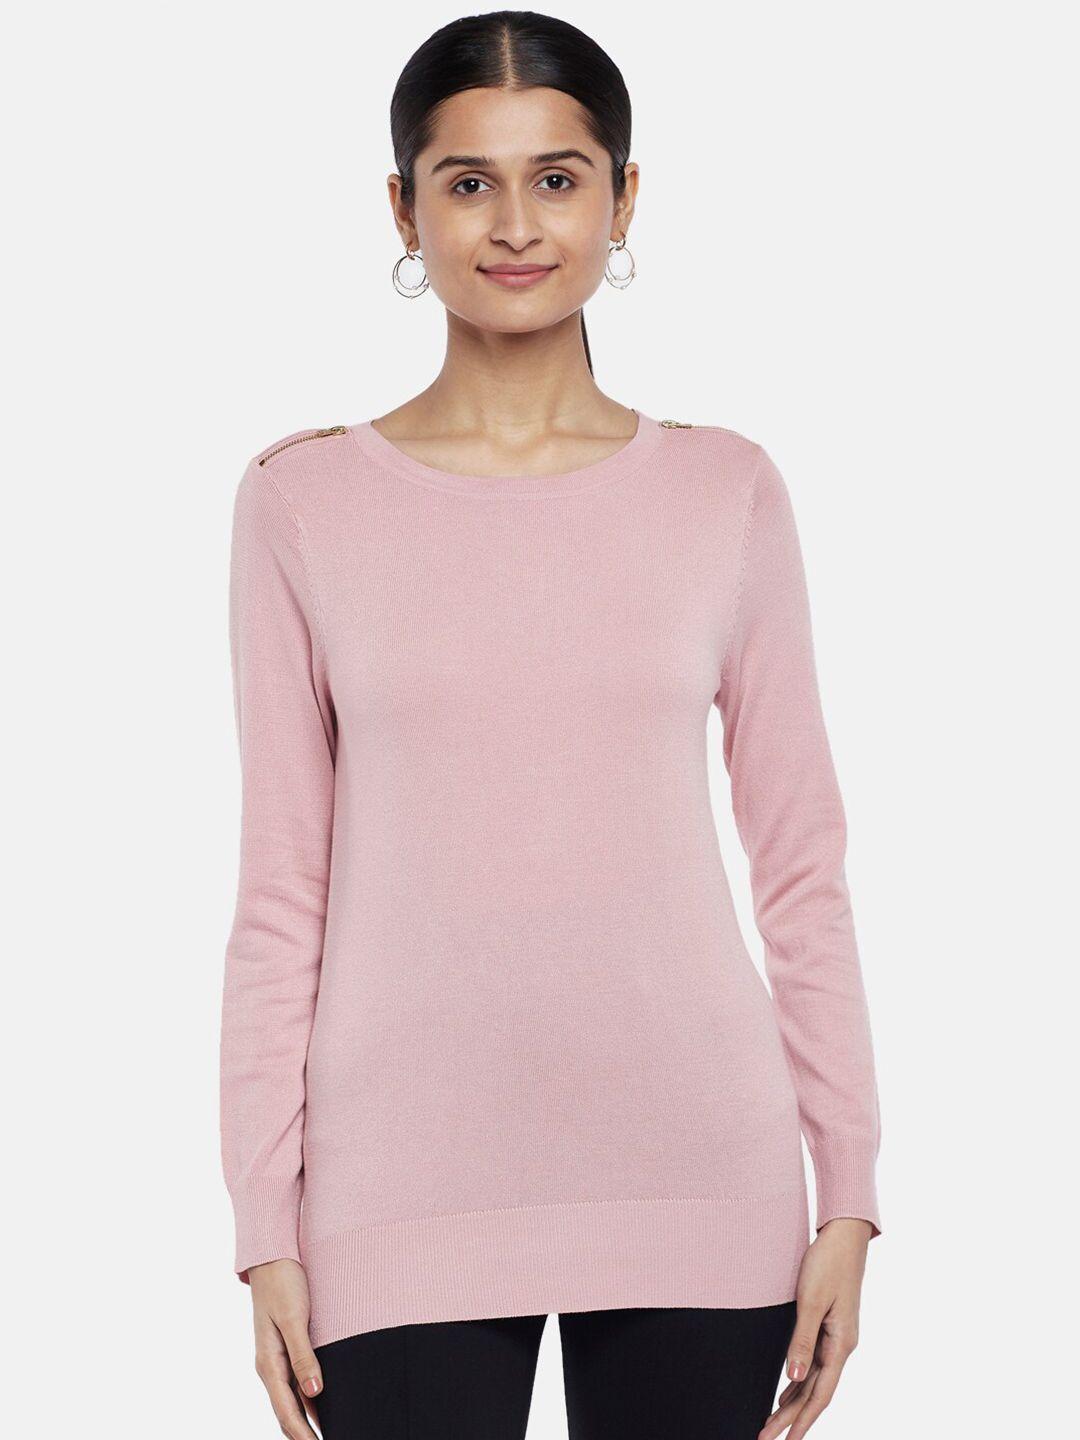 annabelle by pantaloons women pink long sleeves solid top